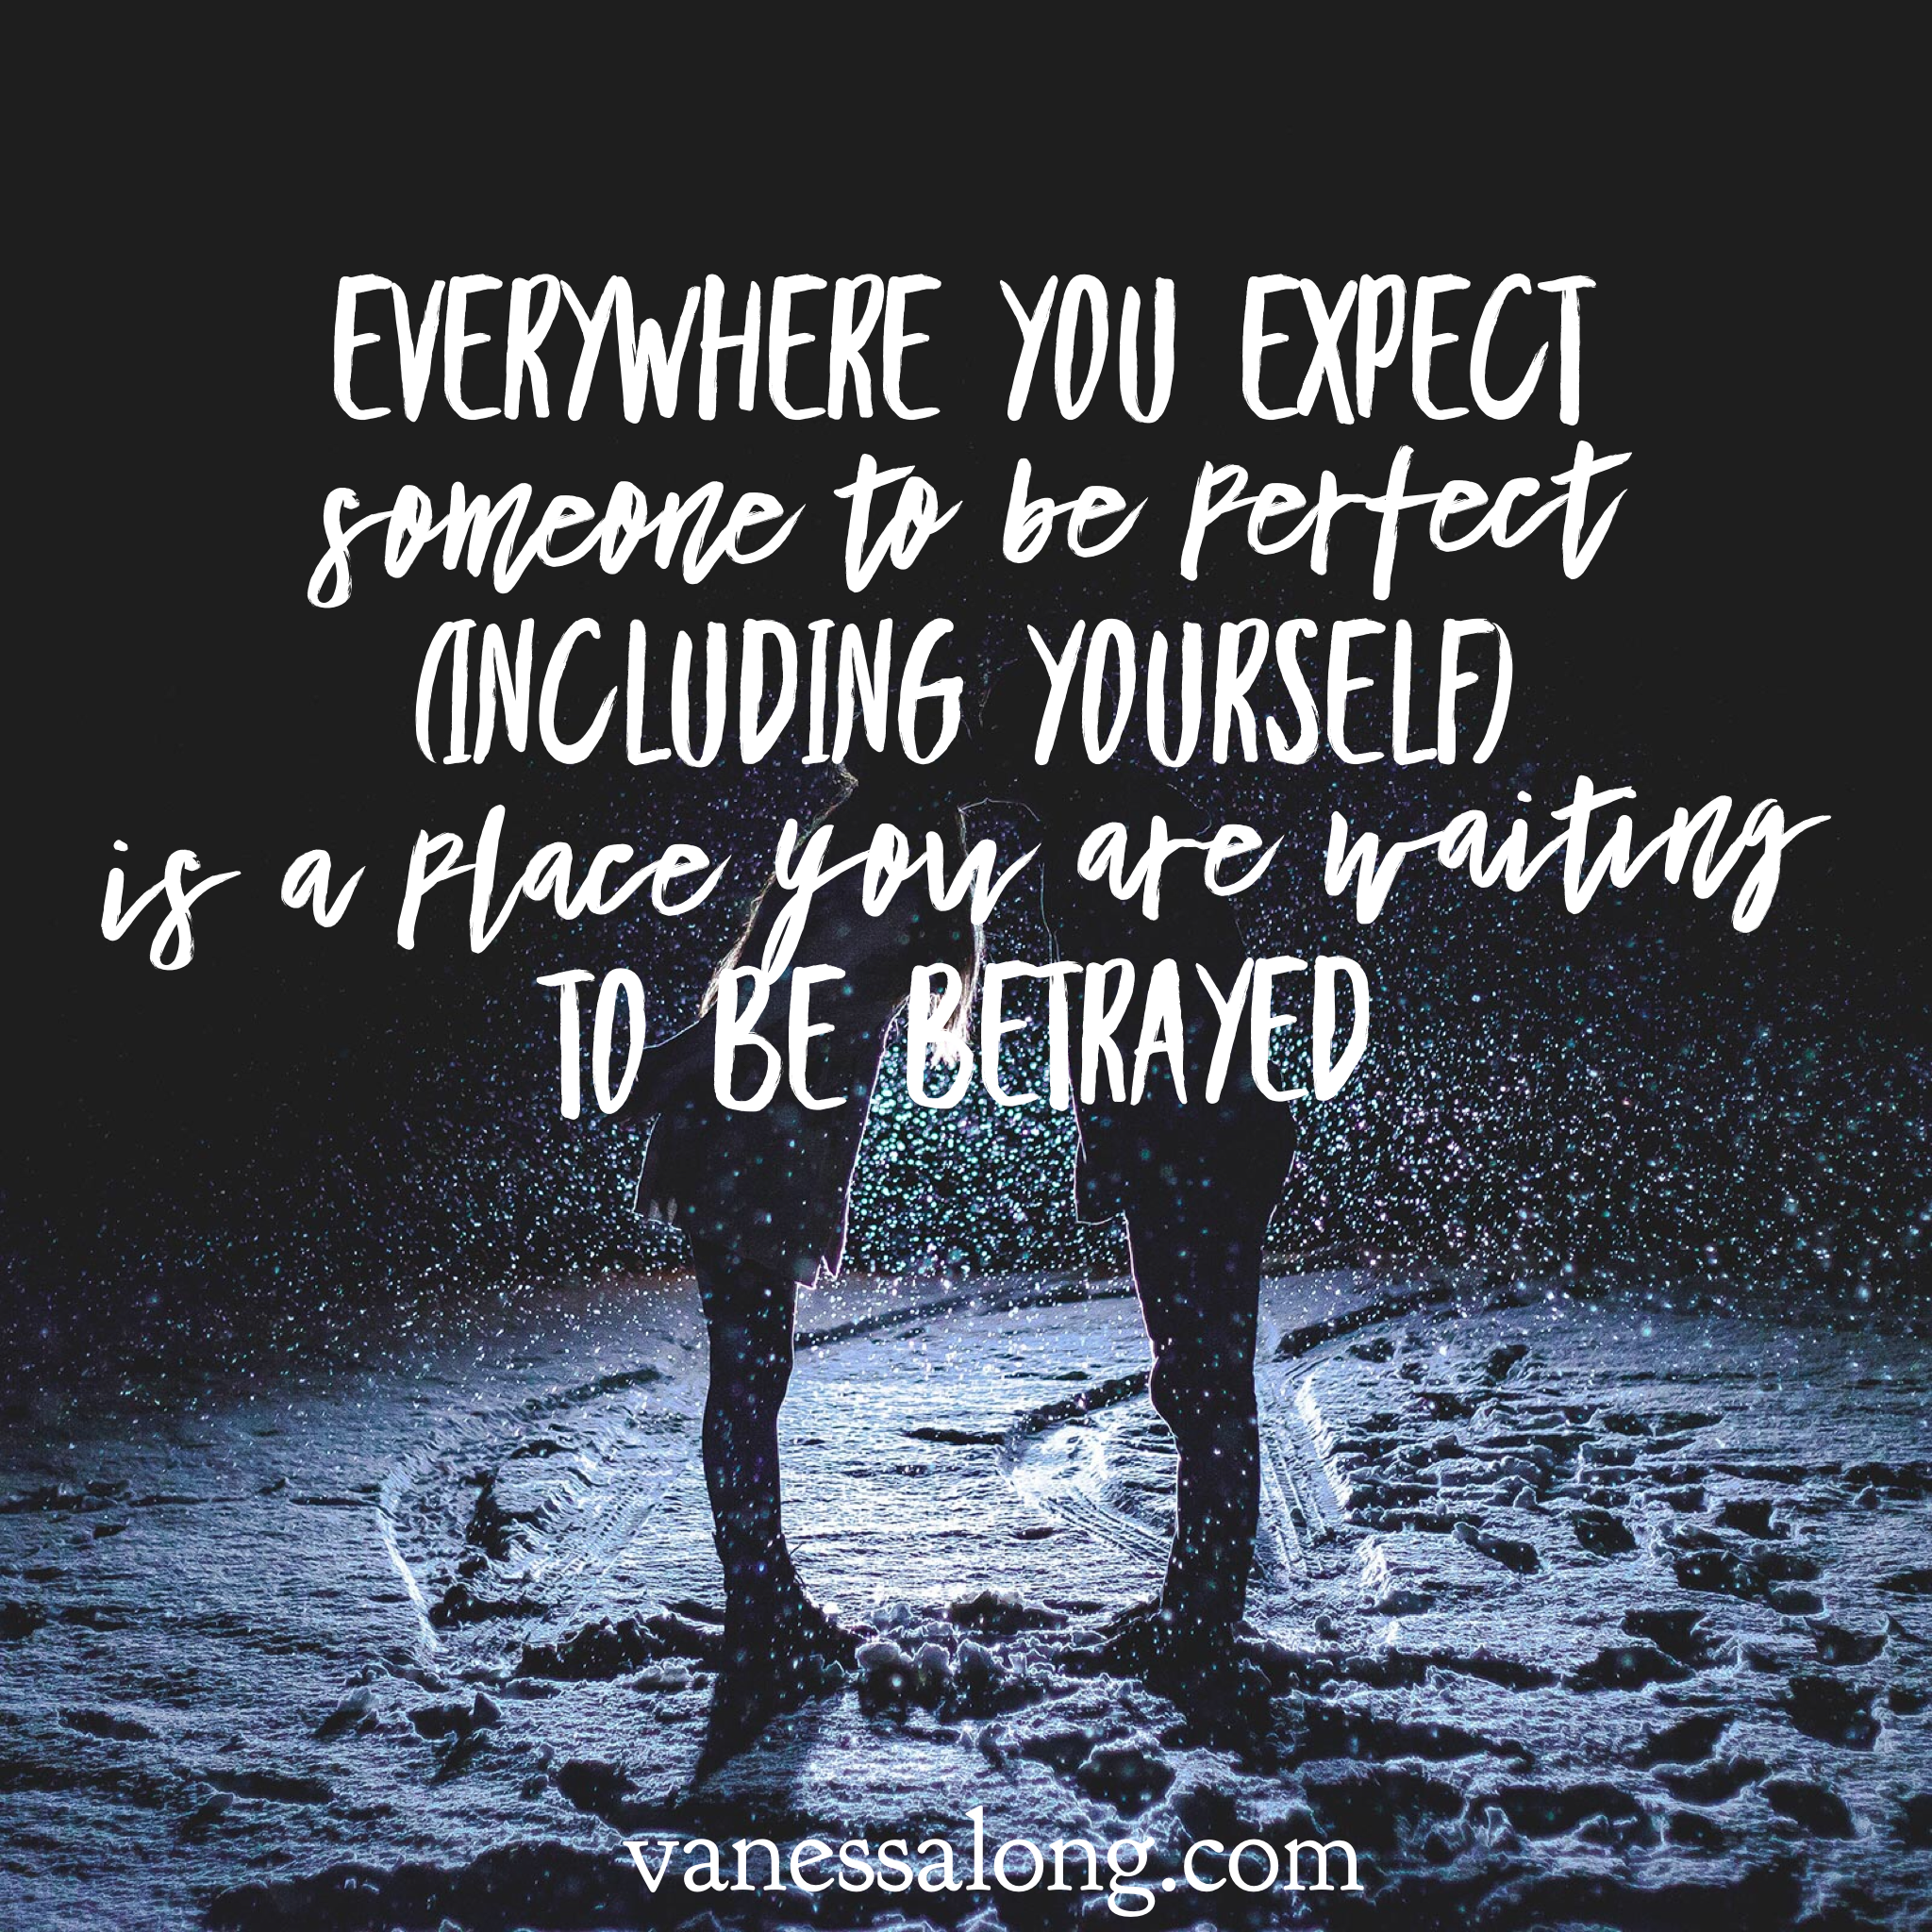 everywhere you expect someone to be perfect - including yourself - is a place you are waiting to be betrayed